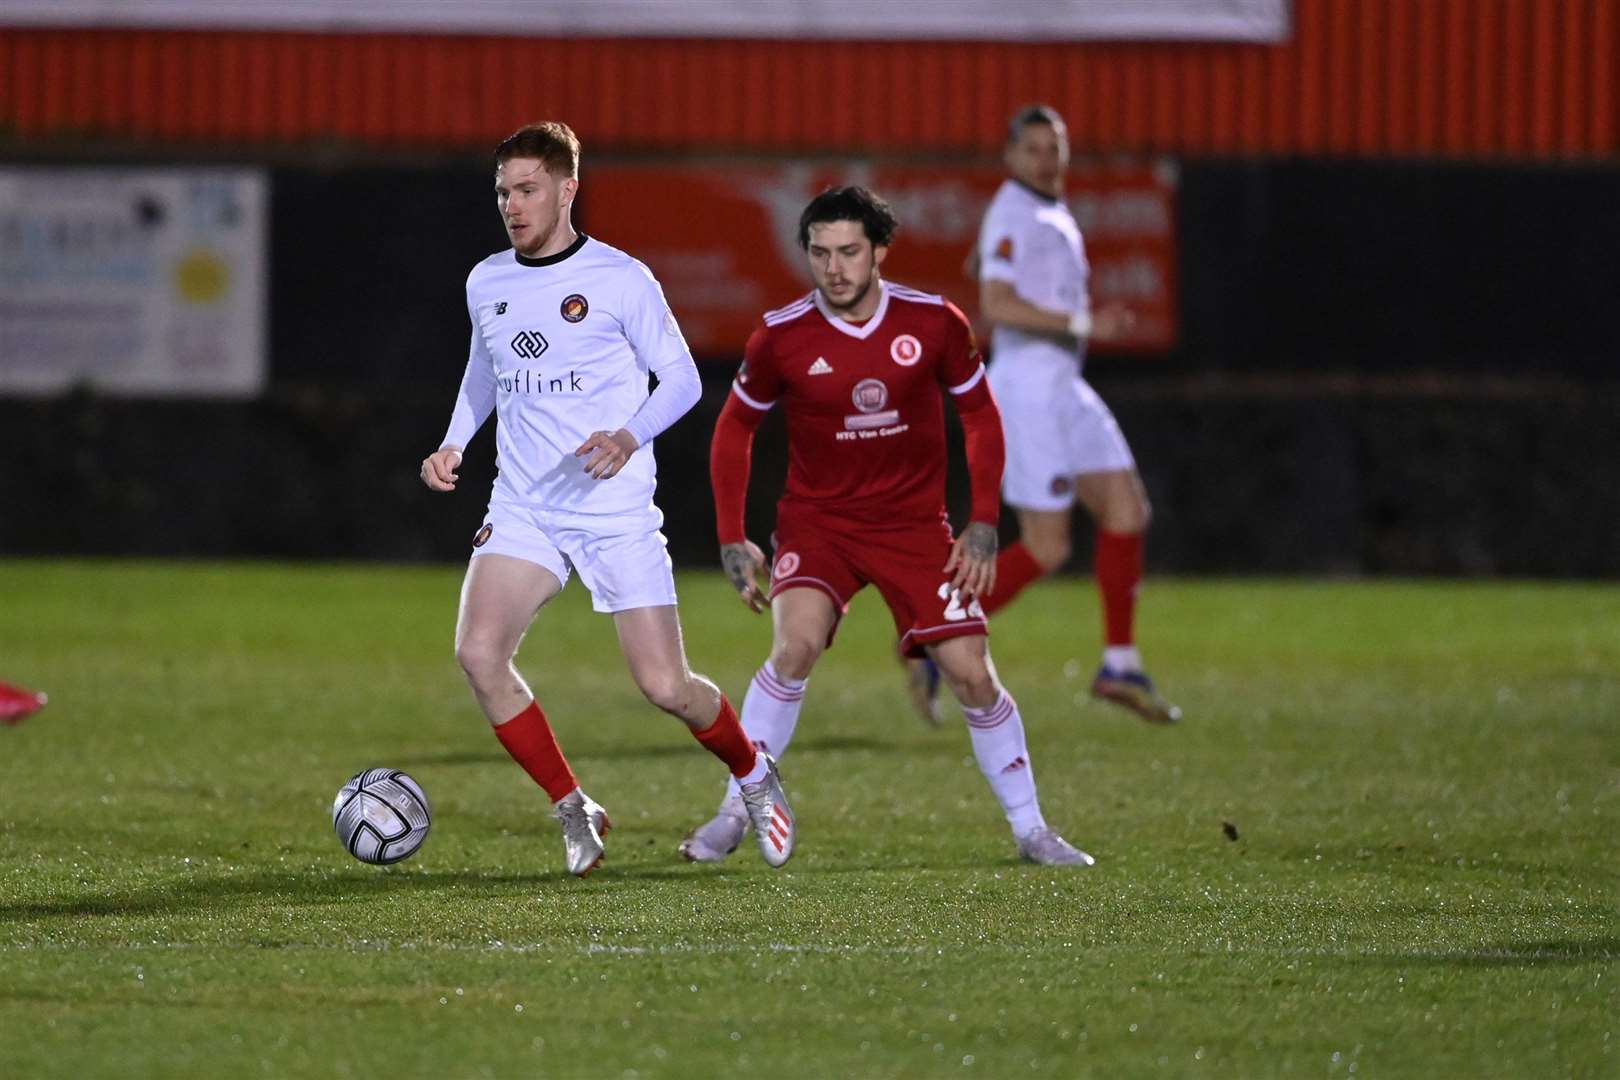 Darren Oldaker in action for Welling United last season. He'll be playing for Hythe in 2021/22 Picture: Keith Gillard